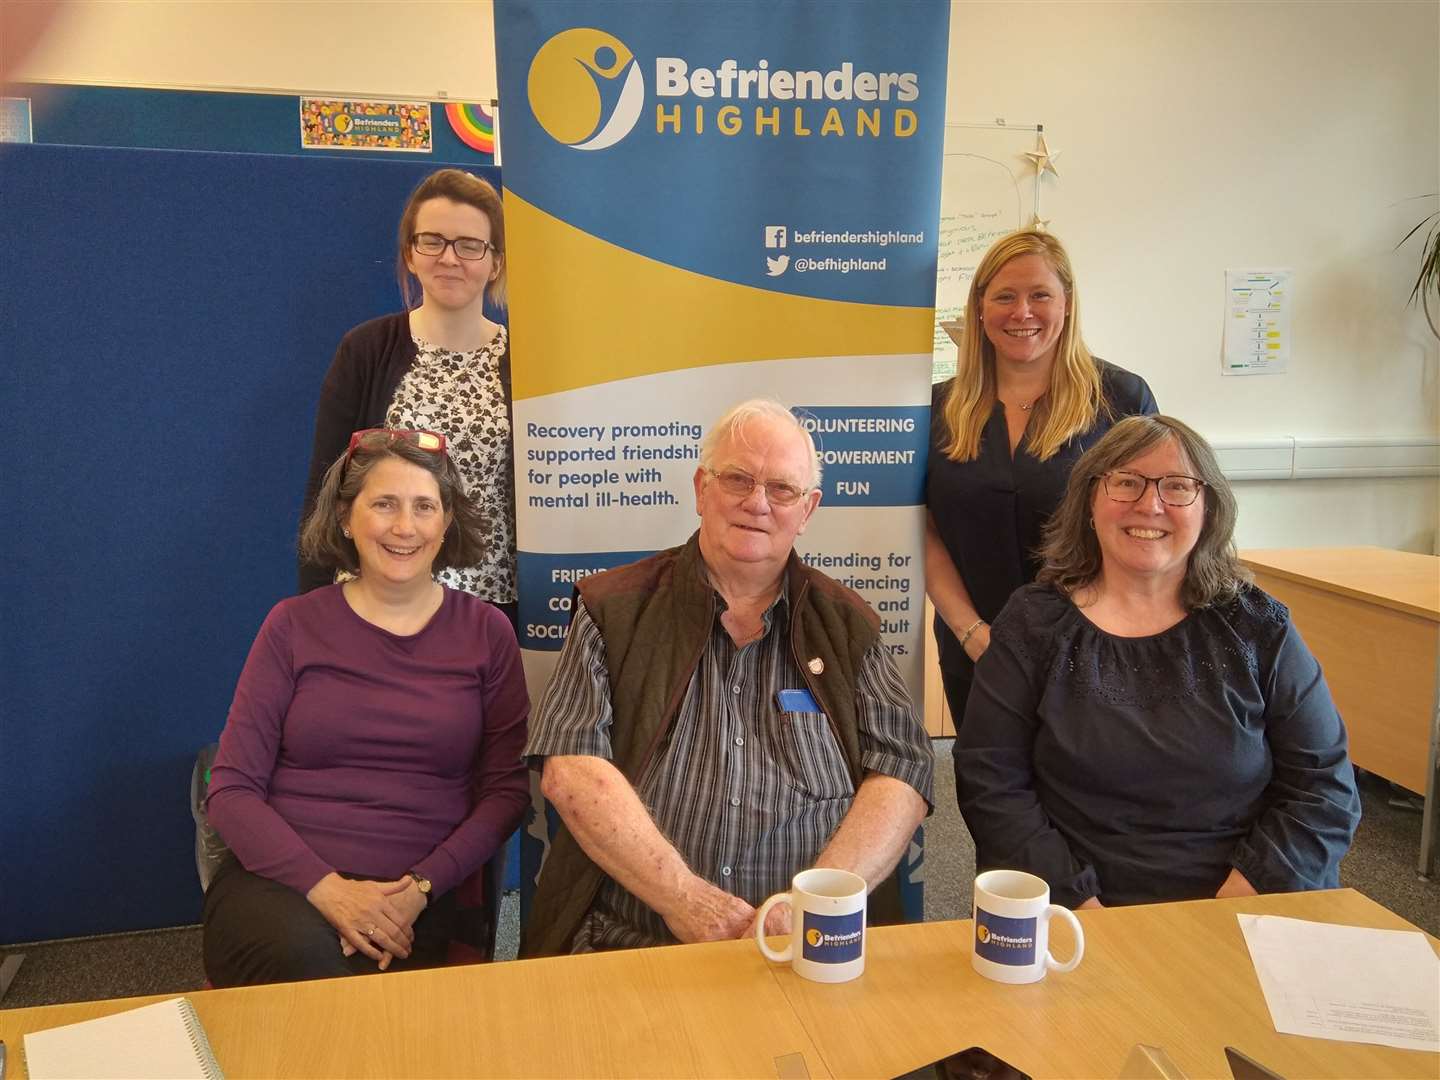 Befrienders Highland Fundraising Sub-Group, from left to right Sarah Southcott, Administrator, Margaret Grant, Fundraising Coordinator, Bill Whyte, Volunteer and BHL Ambassador, Jo Page, Board Director, and Susan White, Executive Director.